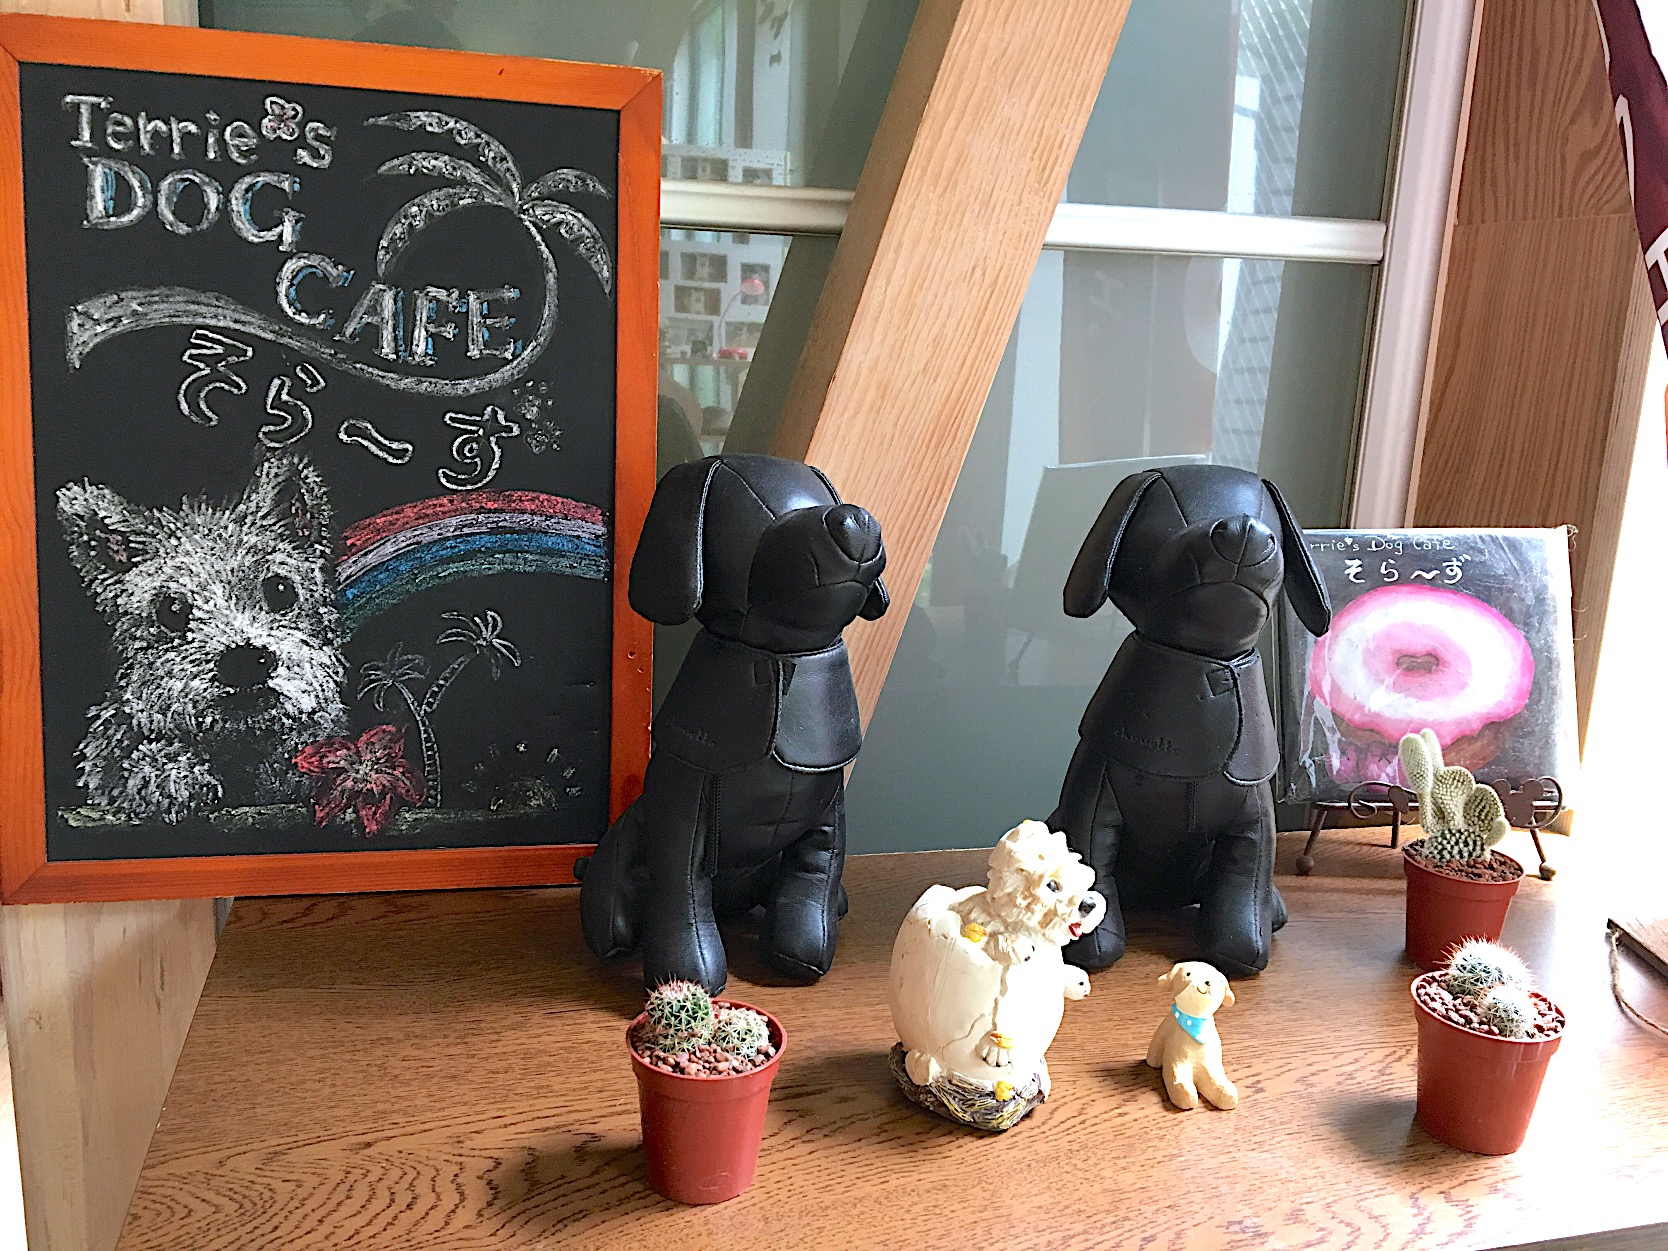 Terries’ Dog Cafe そら〜ず（テリーズ ドッグカフェ）